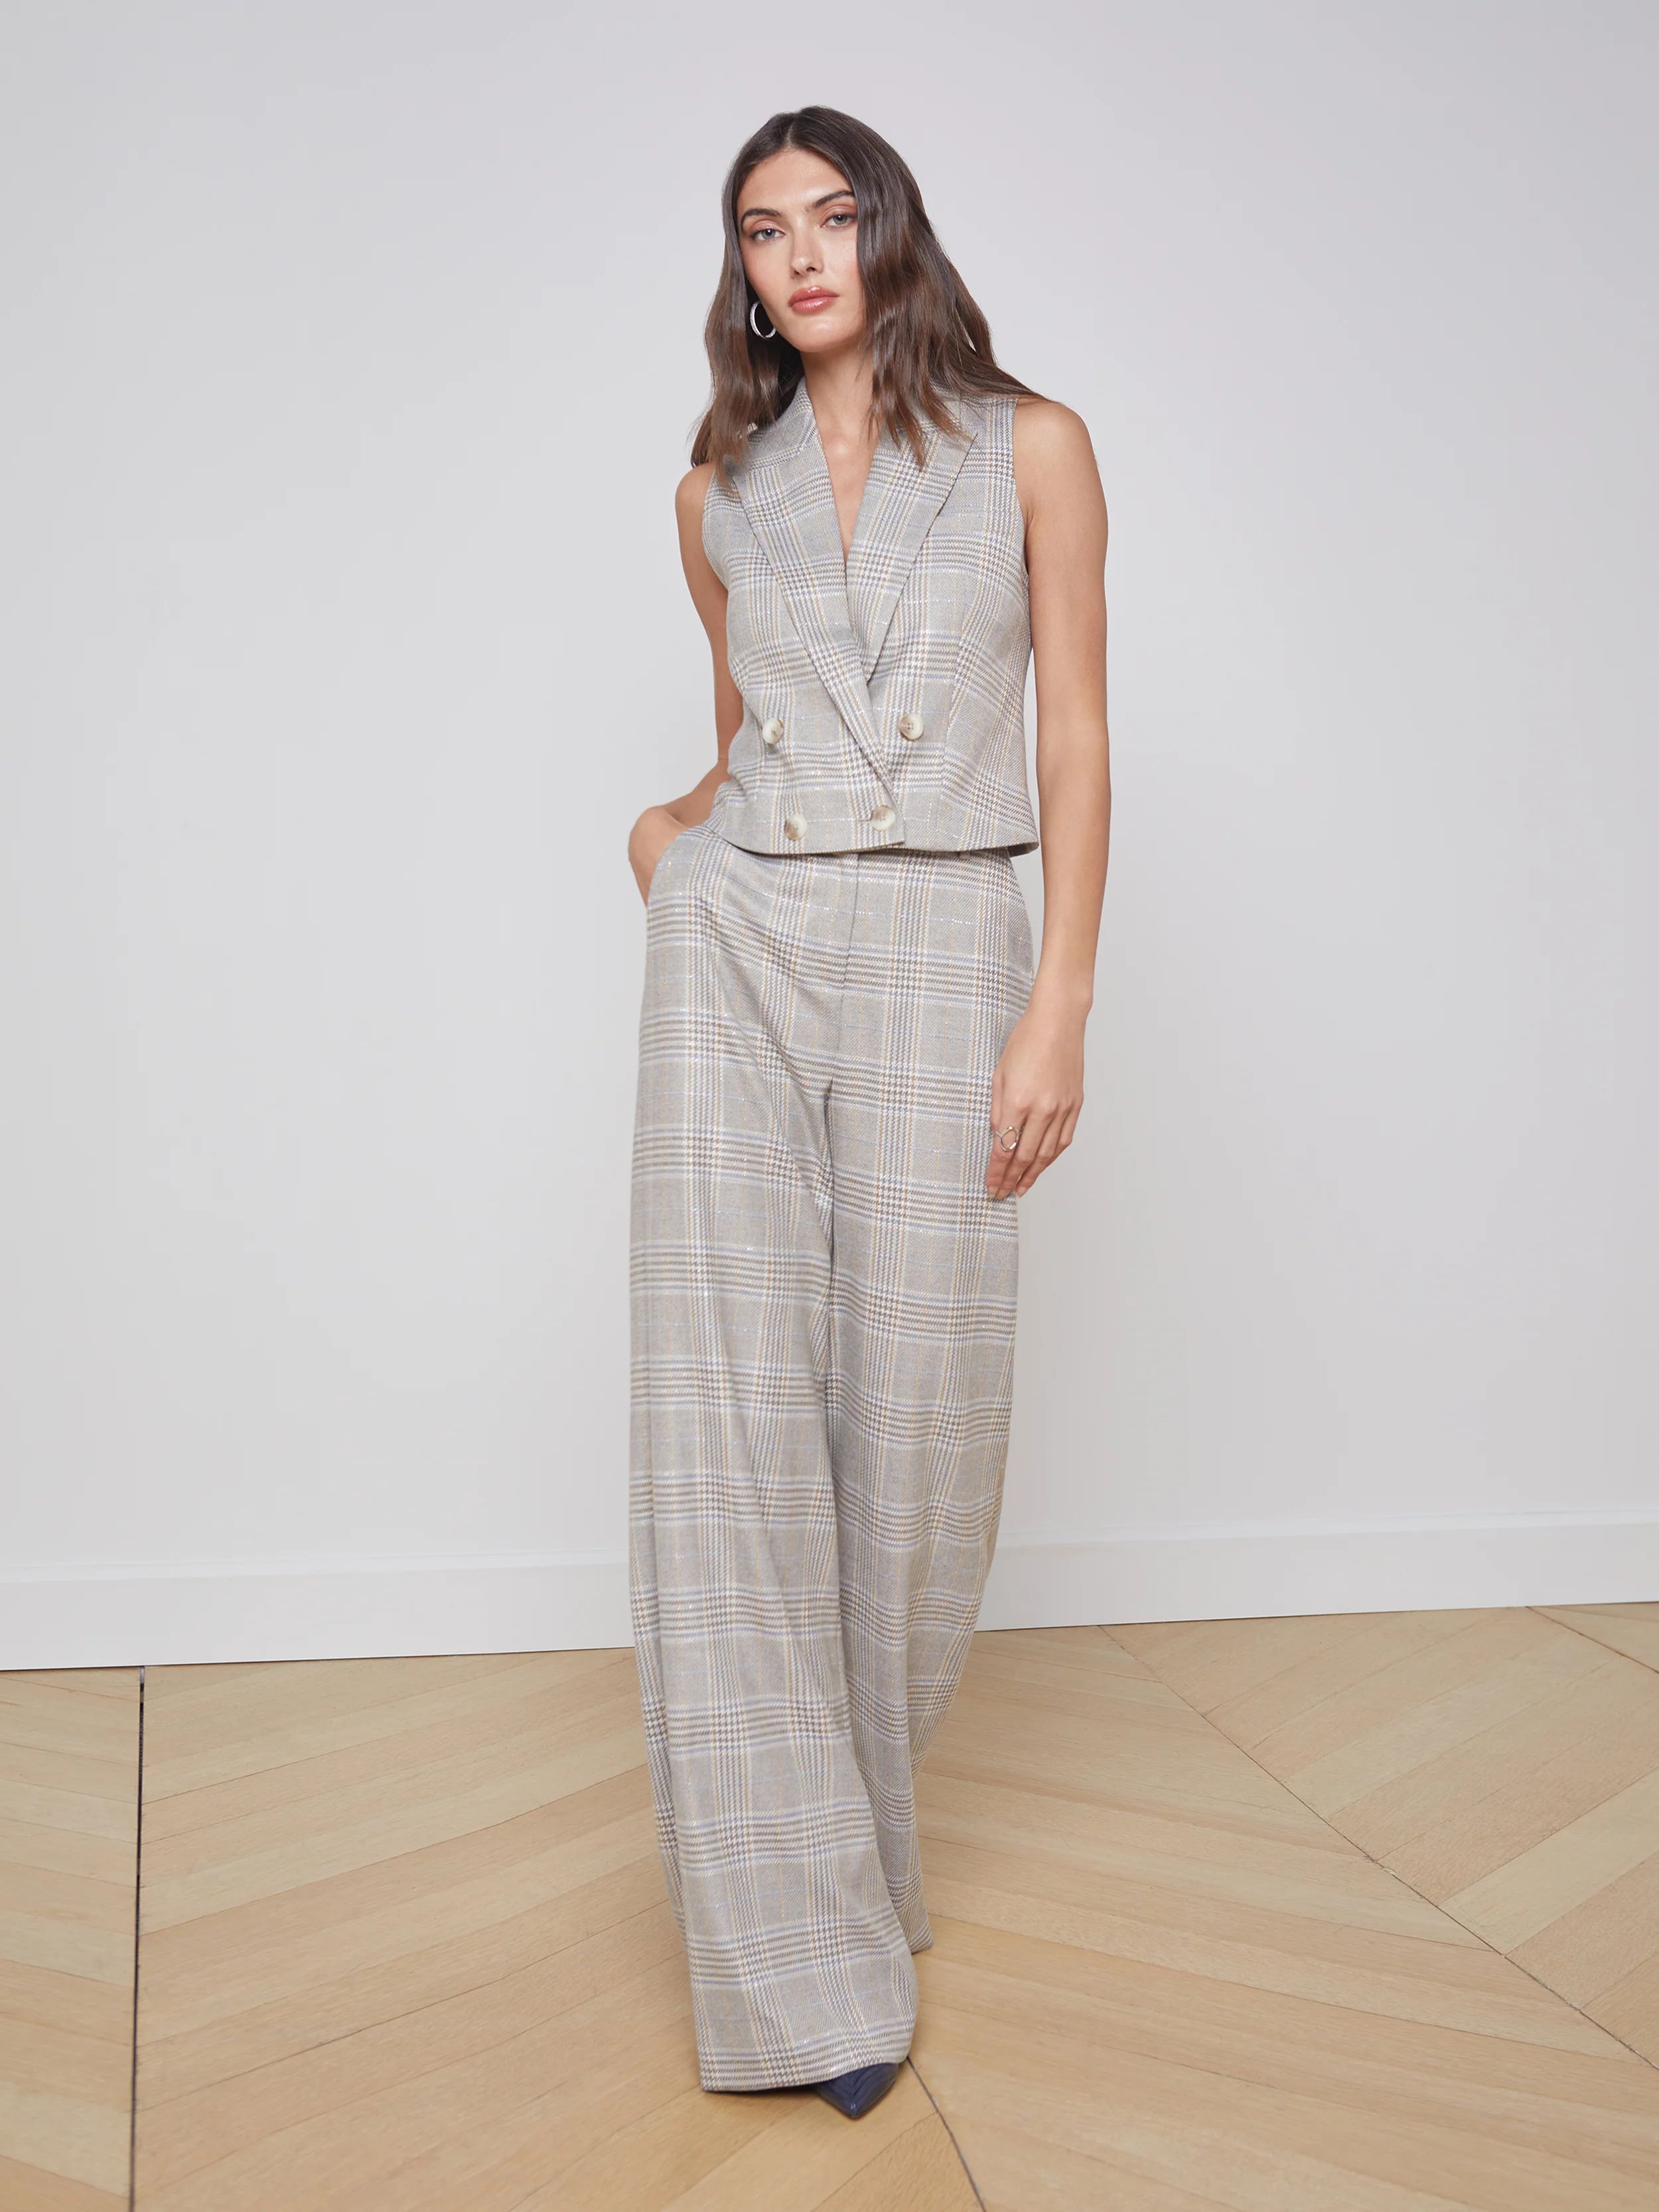 L'AGENCE Pilar Pant in Ivory/Neutral Multi | L'Agence